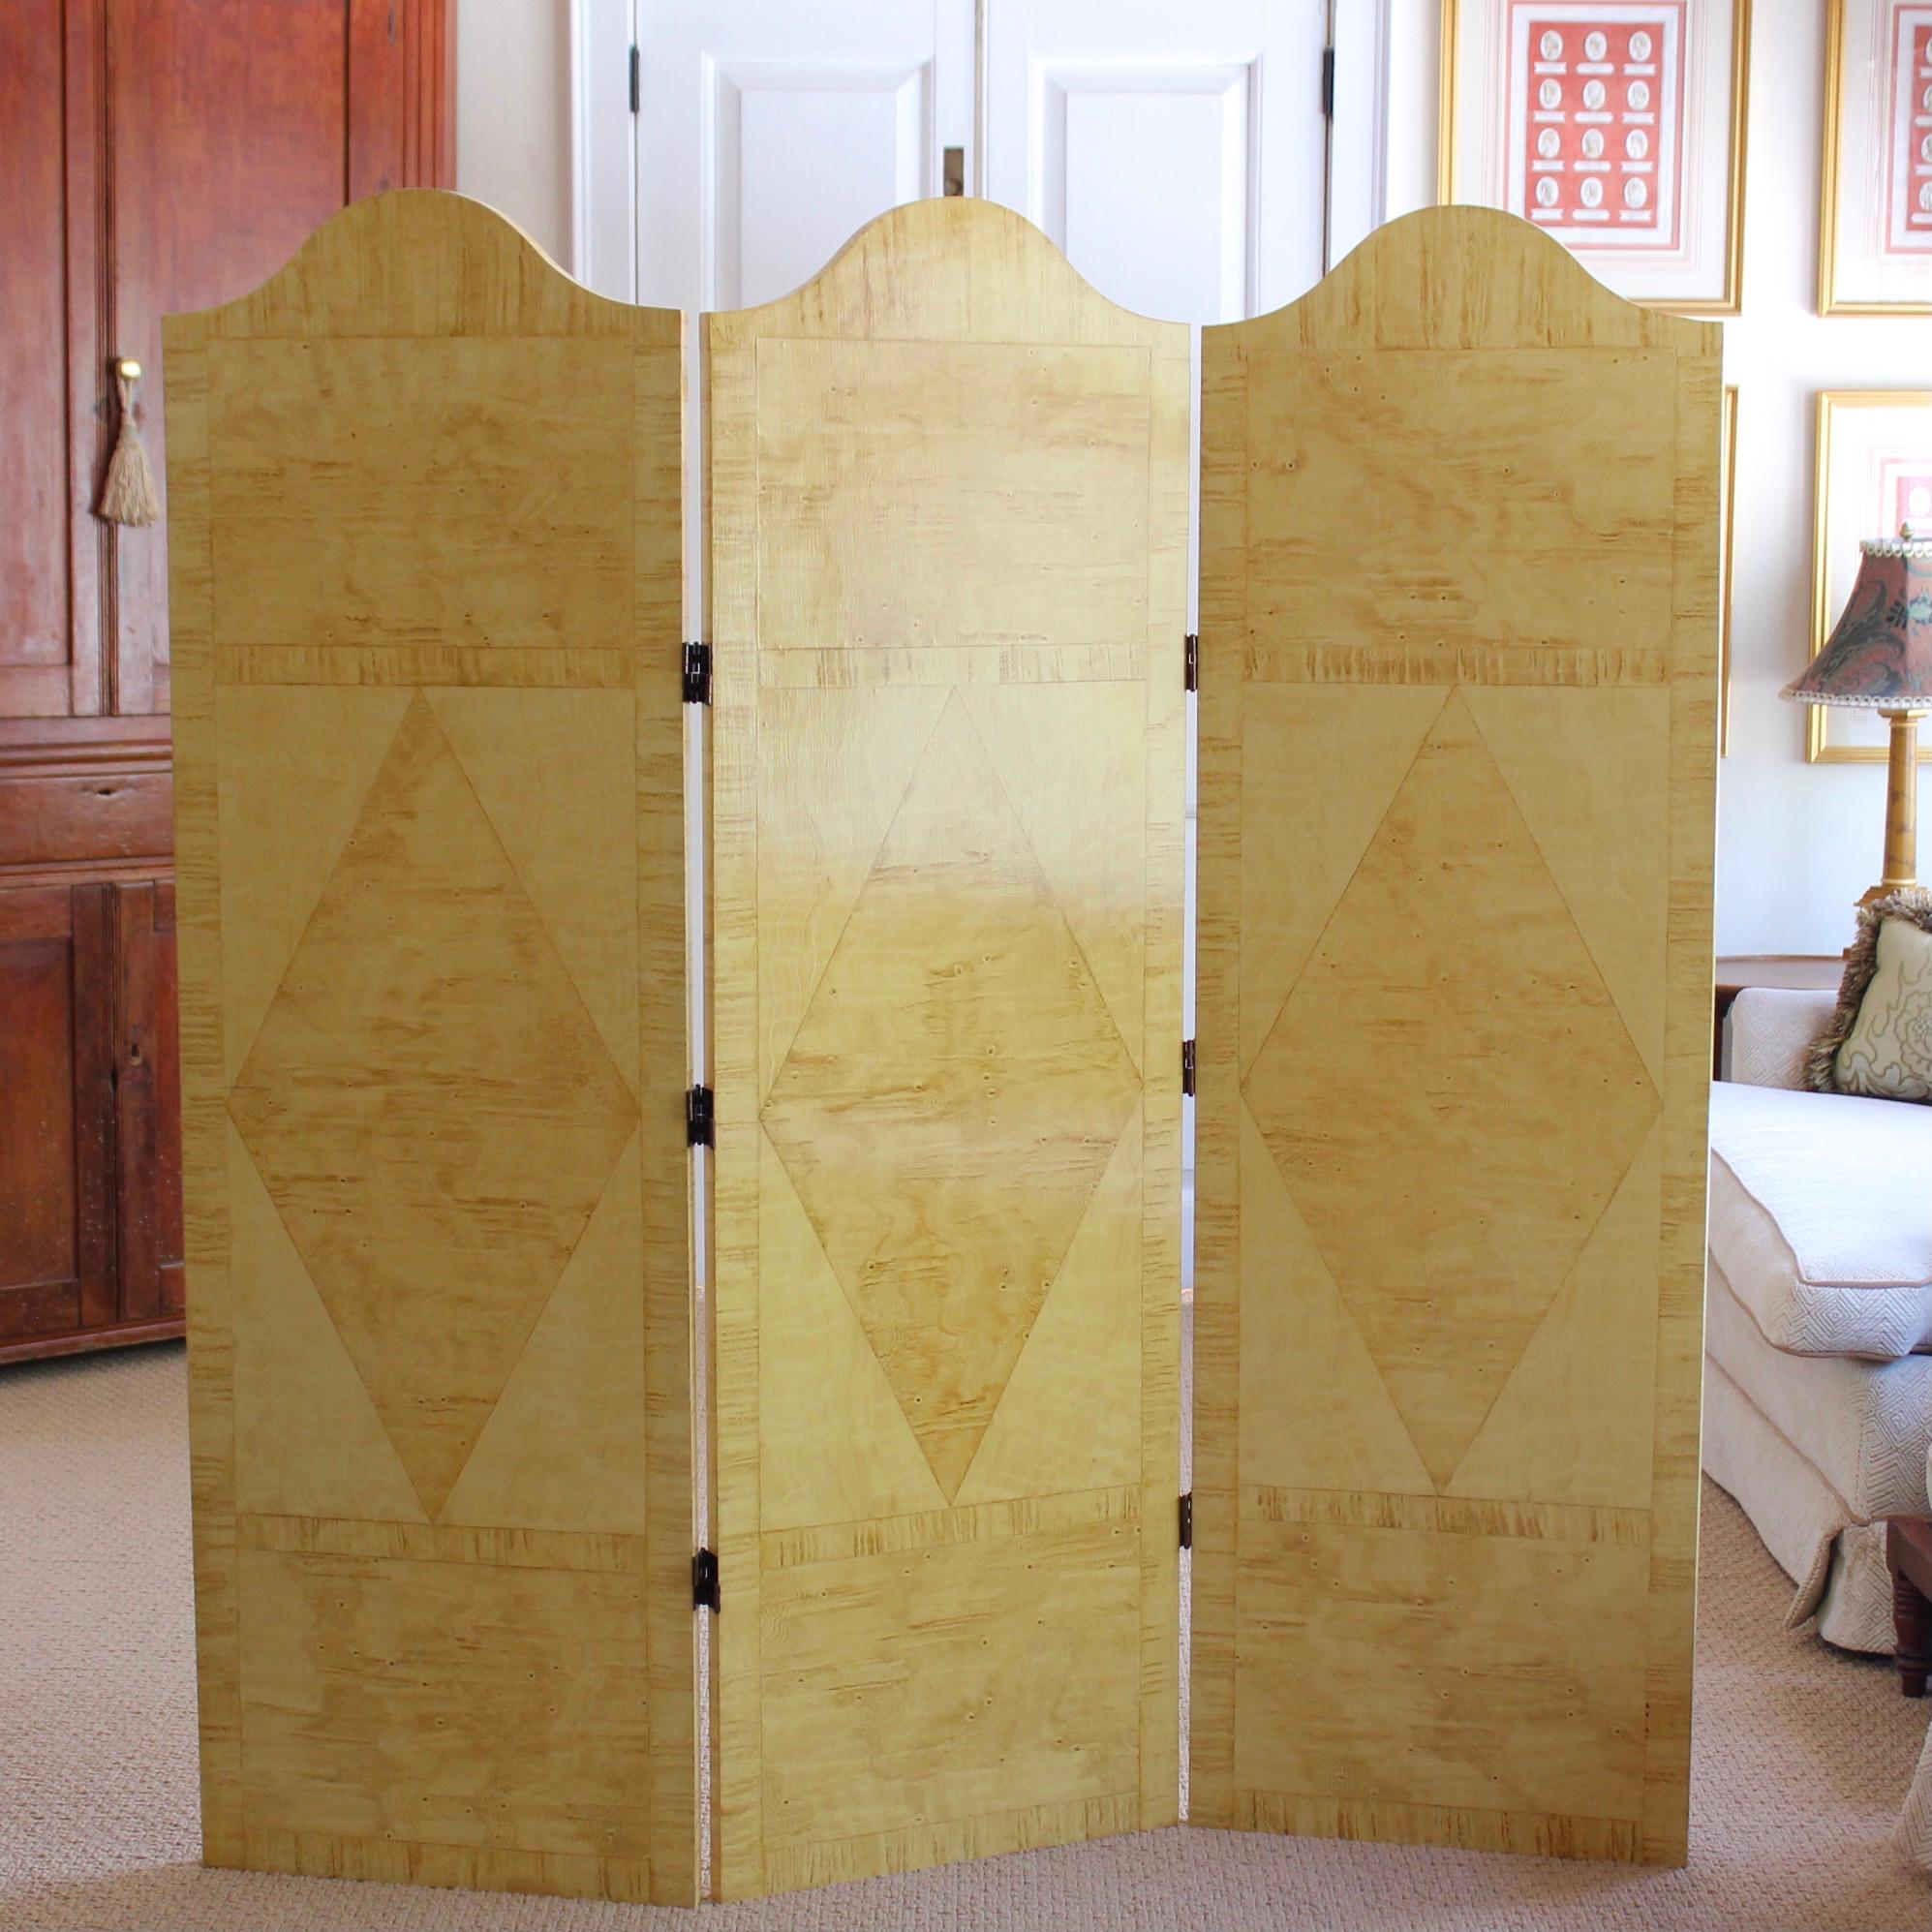 A chic and versatile three panel wooden folding screen, with trompe l’oeil faux bois marquetry panels featuring large diamonds set between rectangular panels on each. The screen can be configured in a zig zag or curved back as a traditional dressing